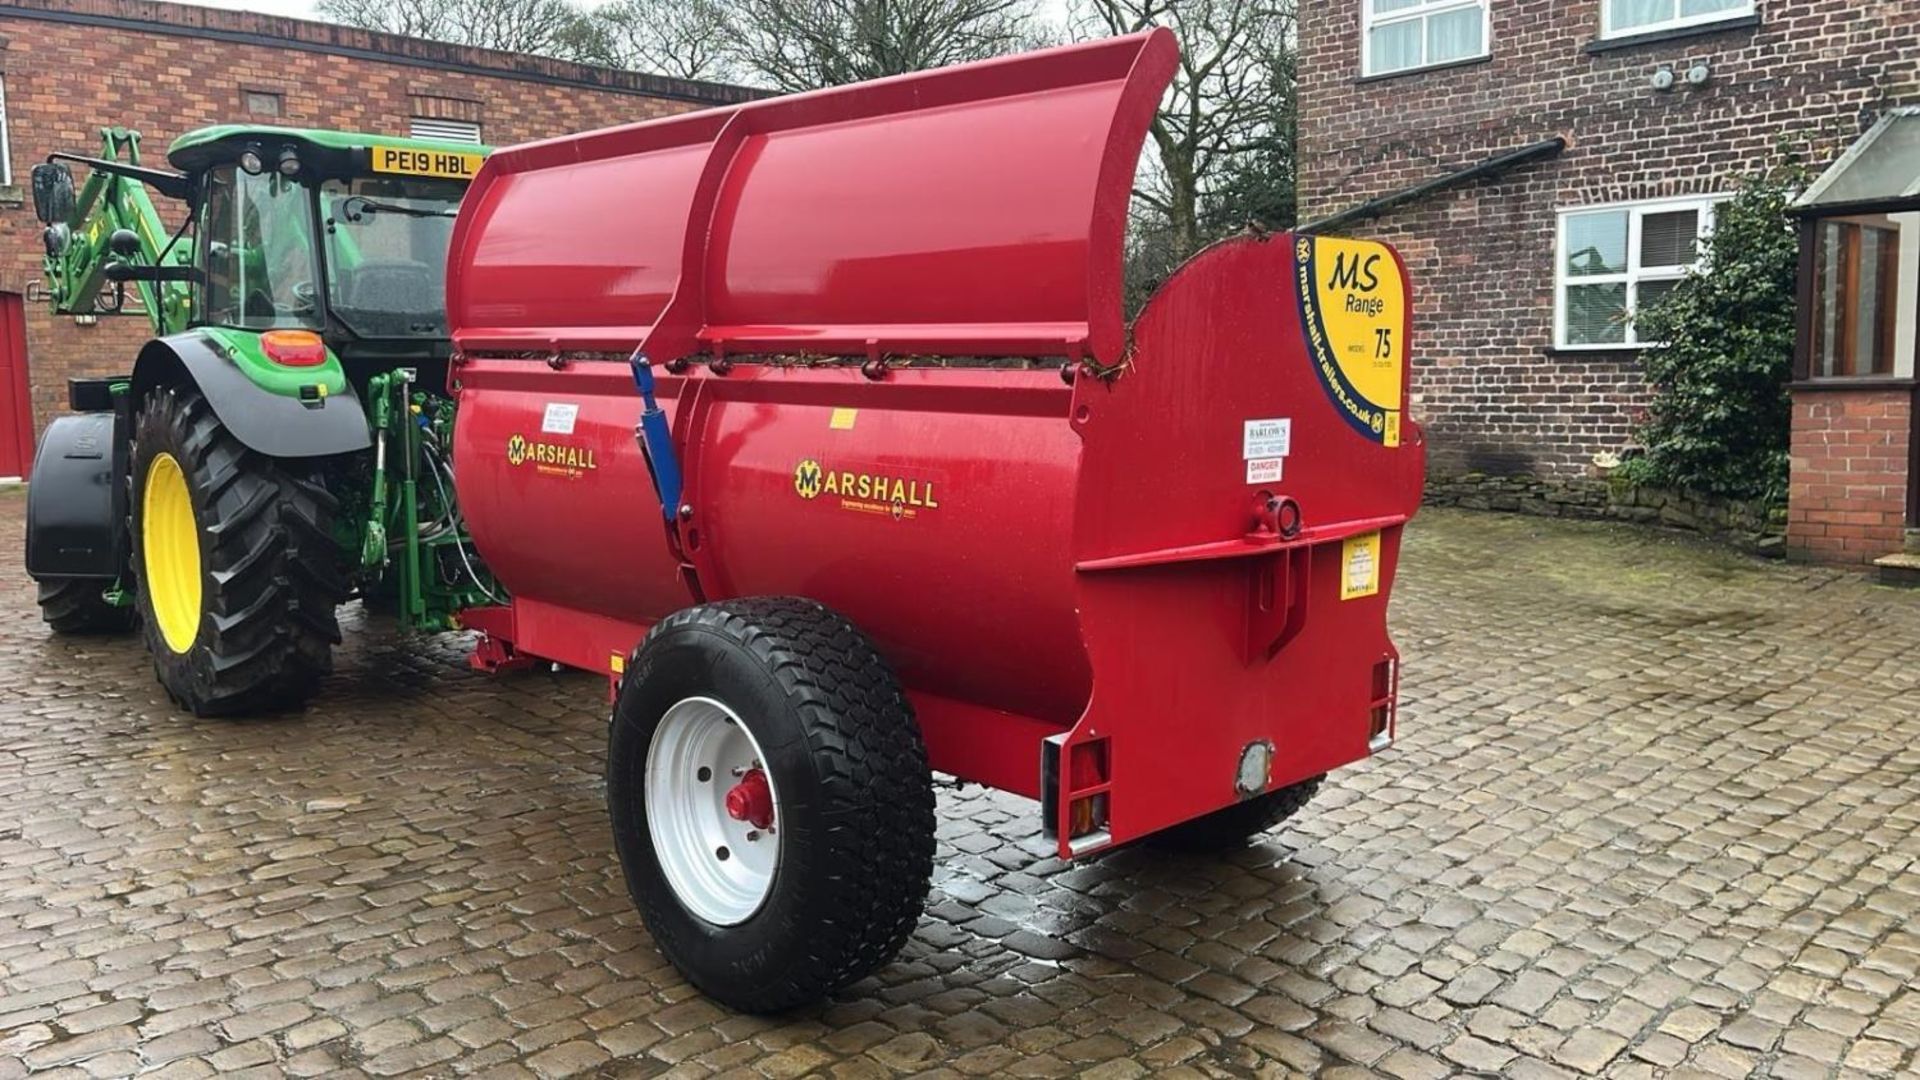 2016 MARSHALL MS 75 ROTARY MANURE SPREADER 7.5 CUBIC YARDS CARRYING CAPACITY 5 TONNE SERIAL NUMBER - Image 7 of 13